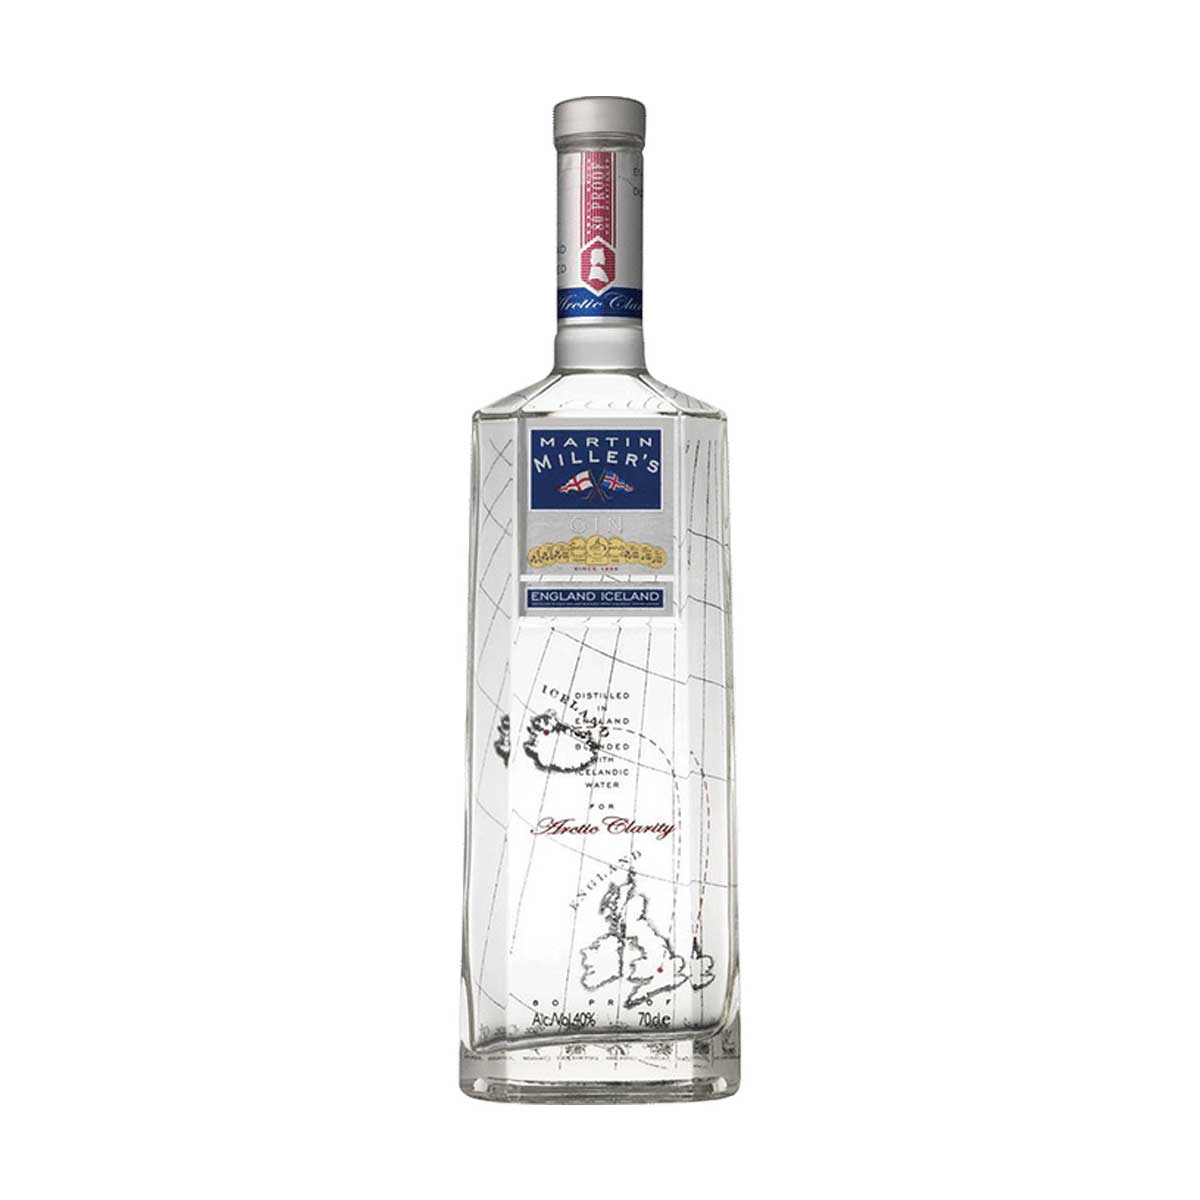 TAG Liquor Stores Delivery - Martin Miller's London Dry Gin 750ml